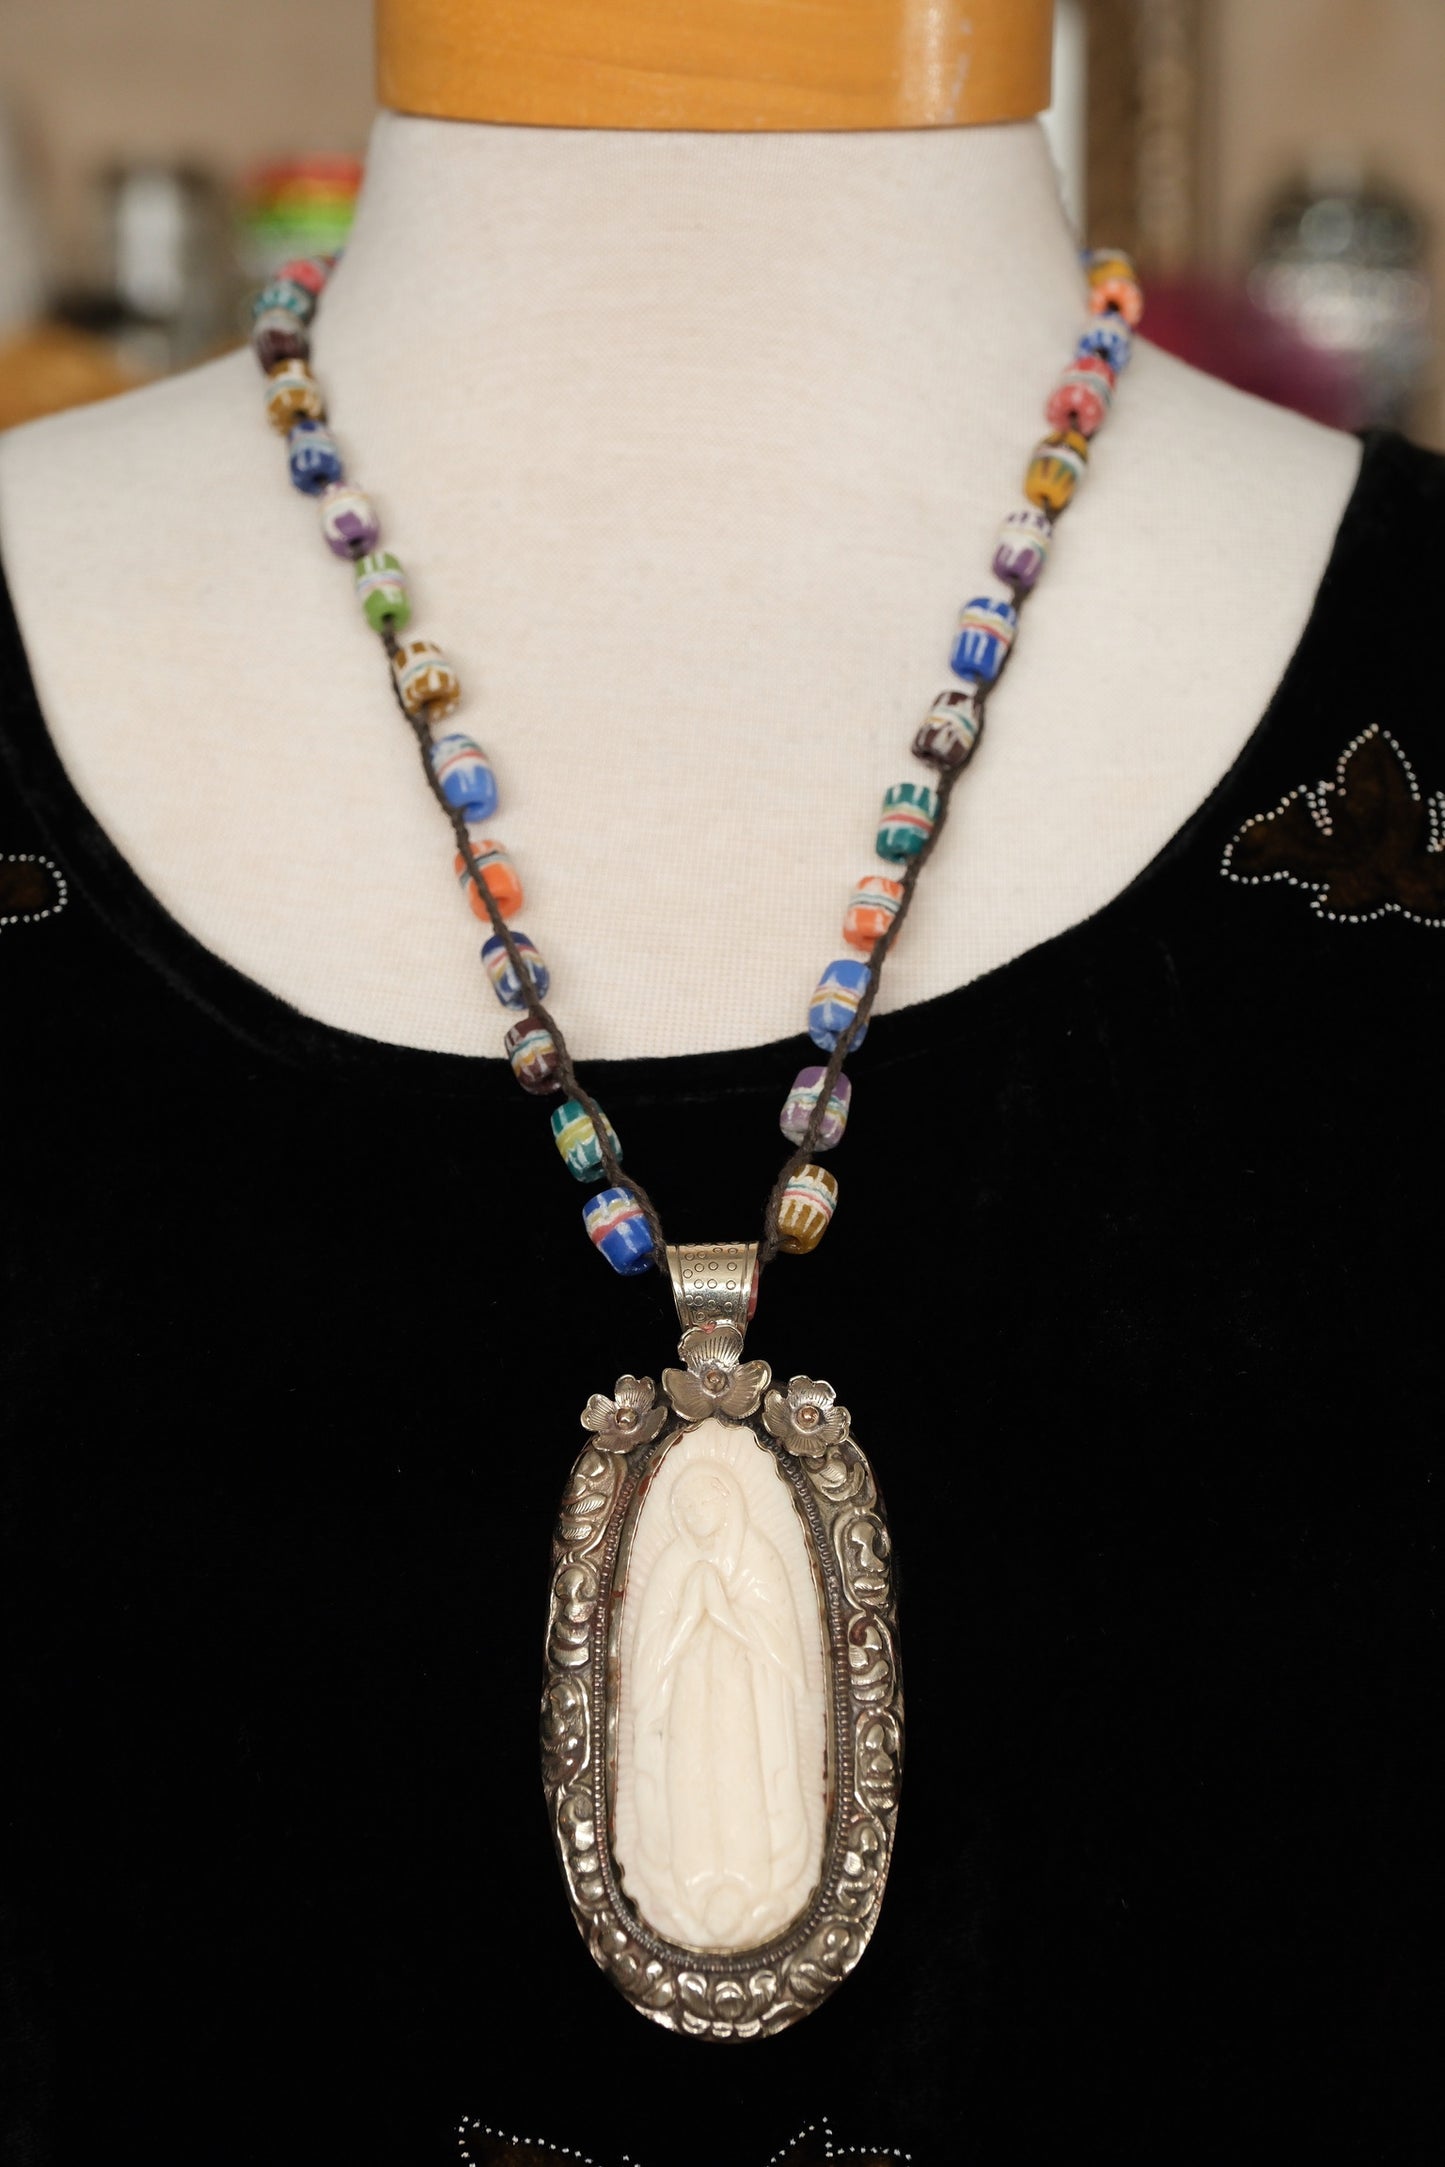 Guadalupe Necklace with African Beads